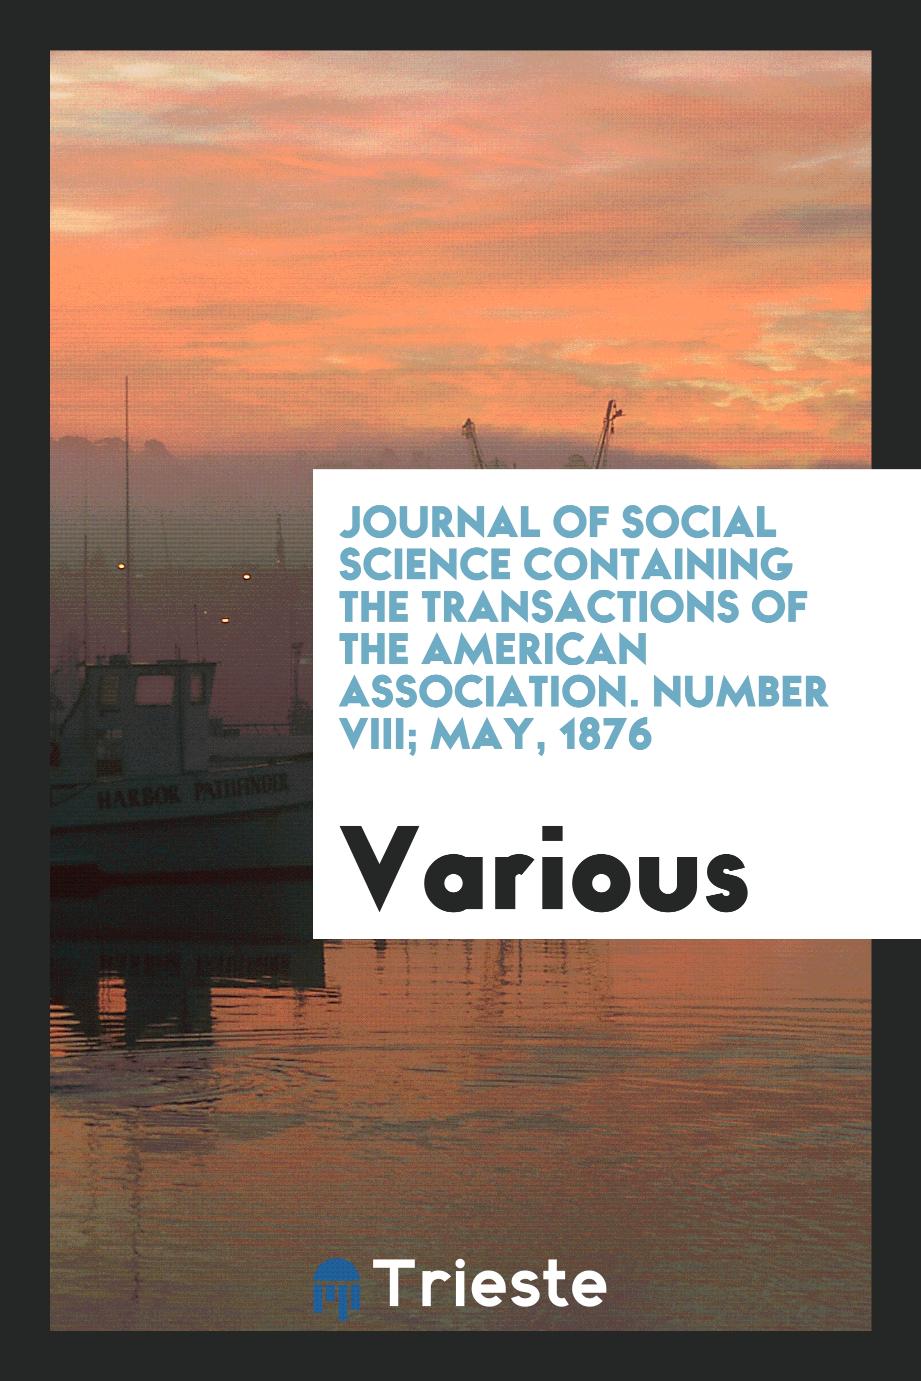 Journal of Social Science Containing the Transactions of the American Association. Number VIII; May, 1876